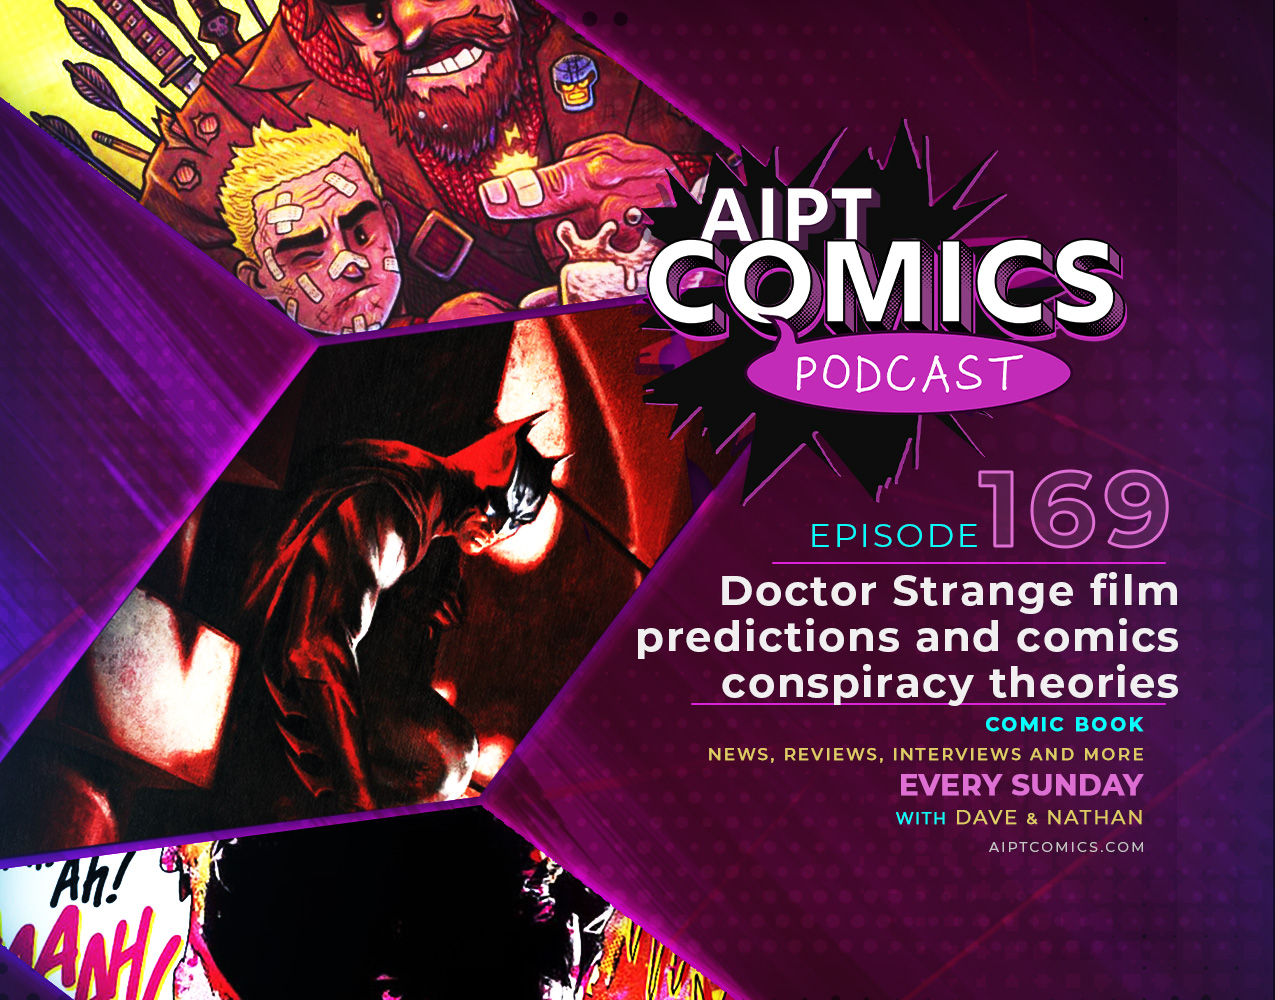 AIPT Comics podcast episode 169: Doctor Strange film predictions and comics conspiracy theories